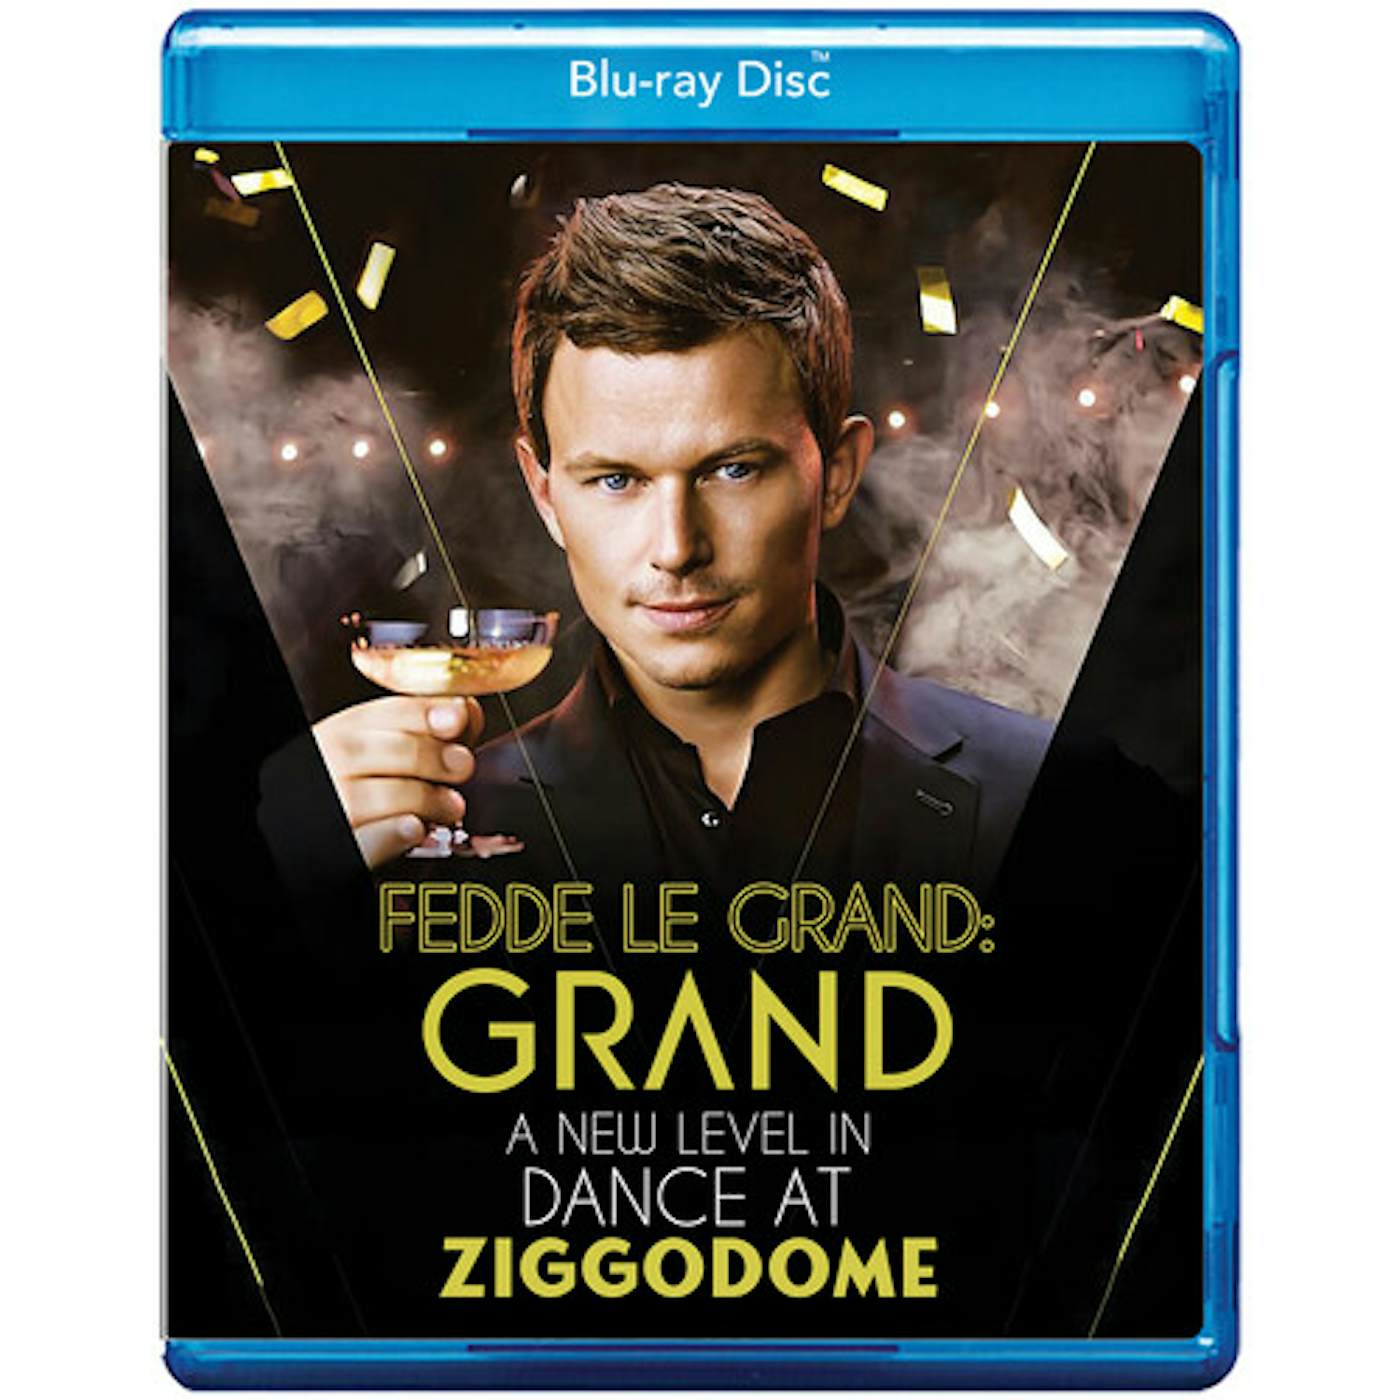 Fedde Le Grand GRAND A NEW LEVEL IN DANCE AT Blu-ray